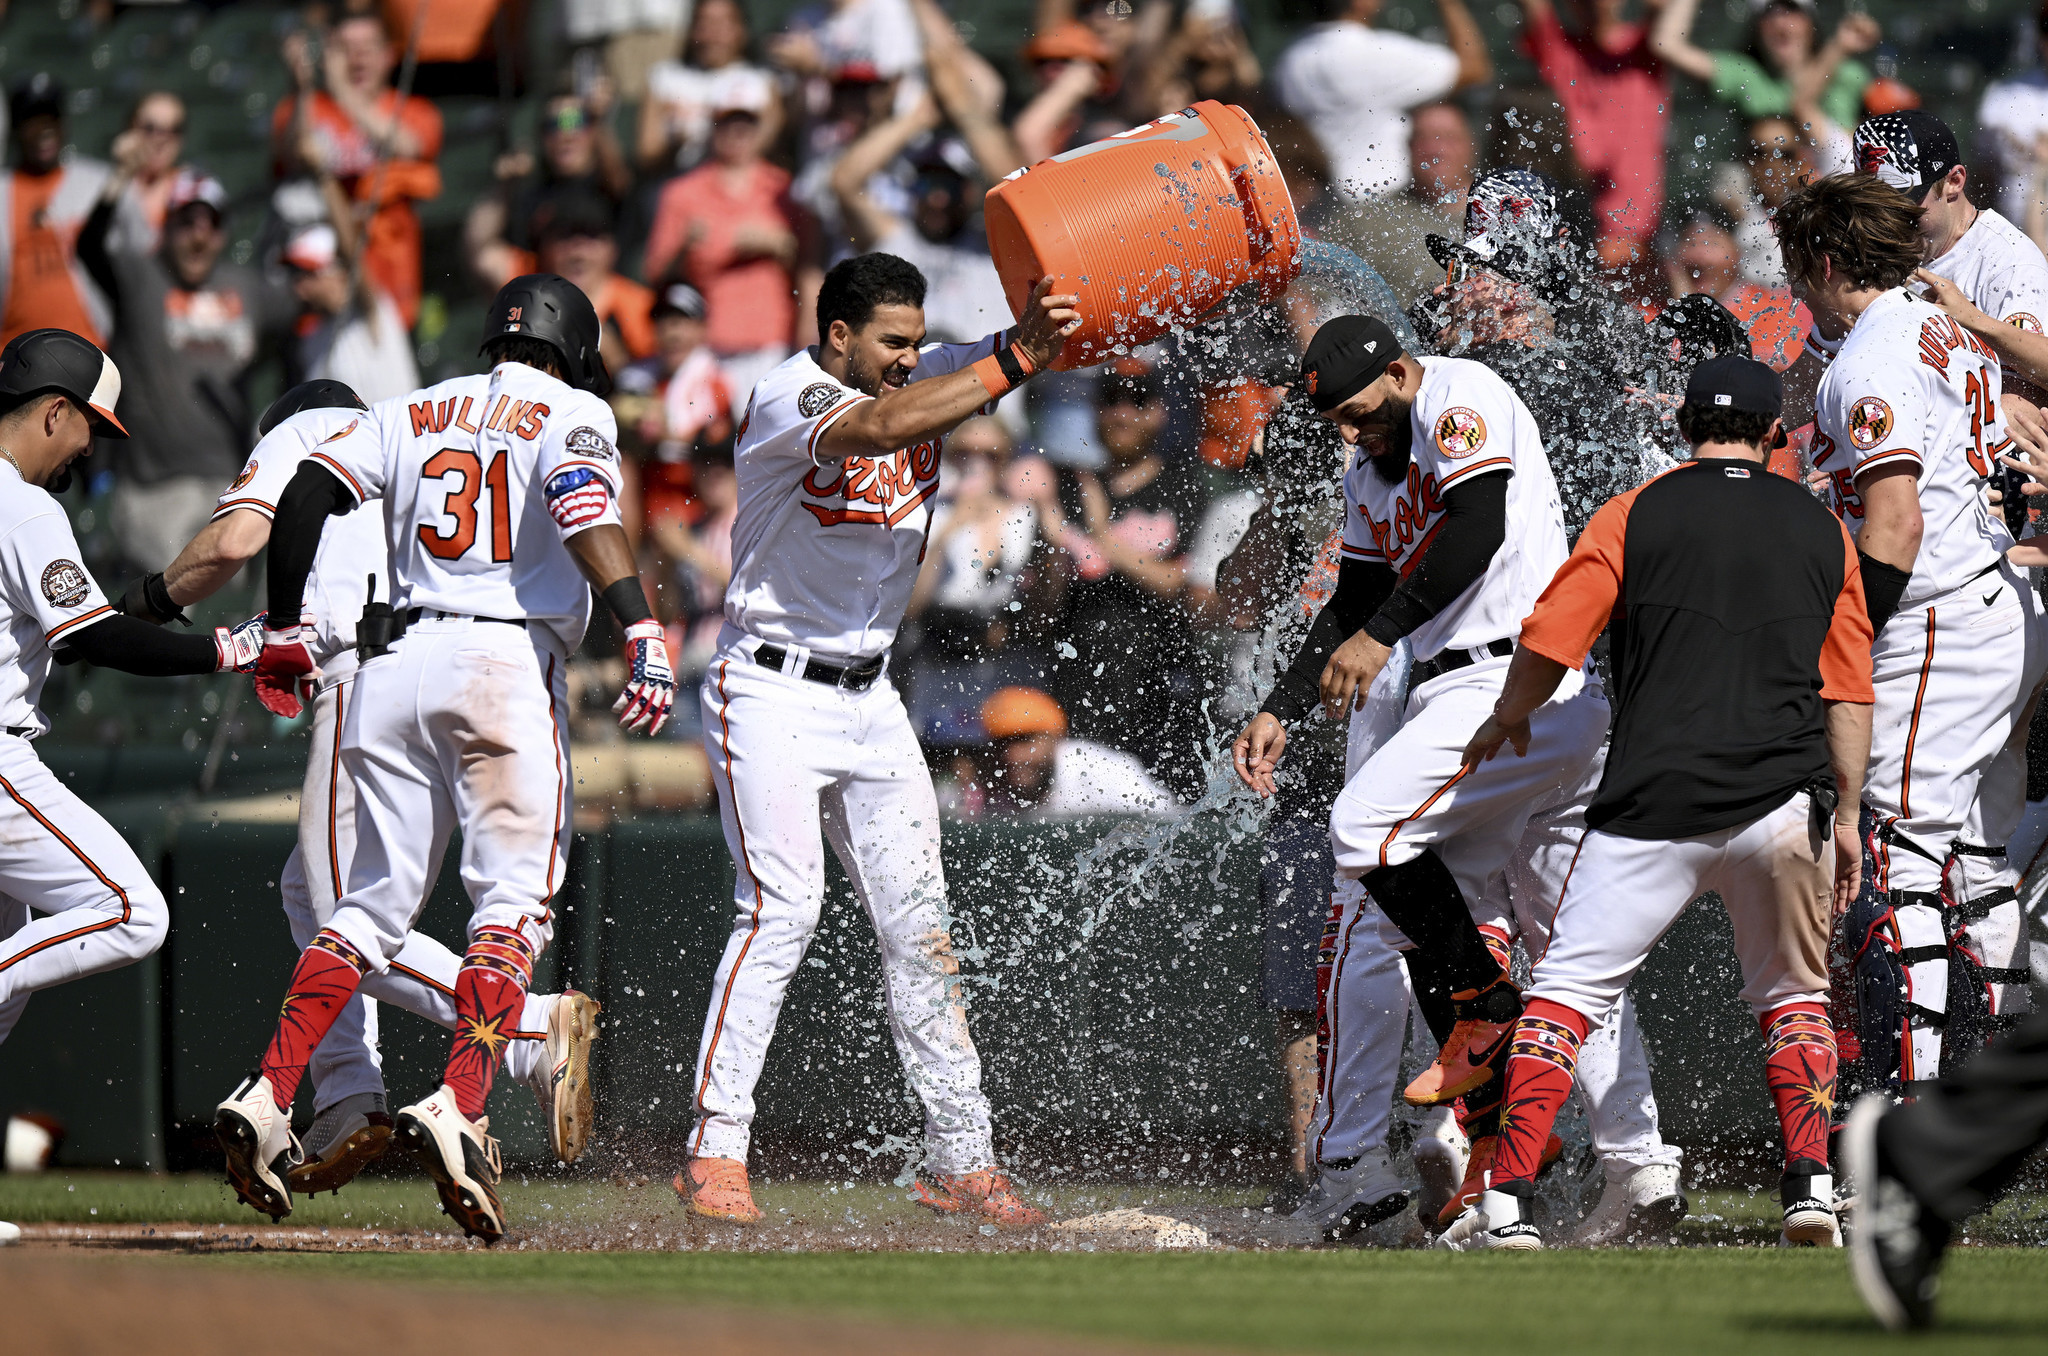 Orioles walk off after Jorge Mateo hit-by-pitch